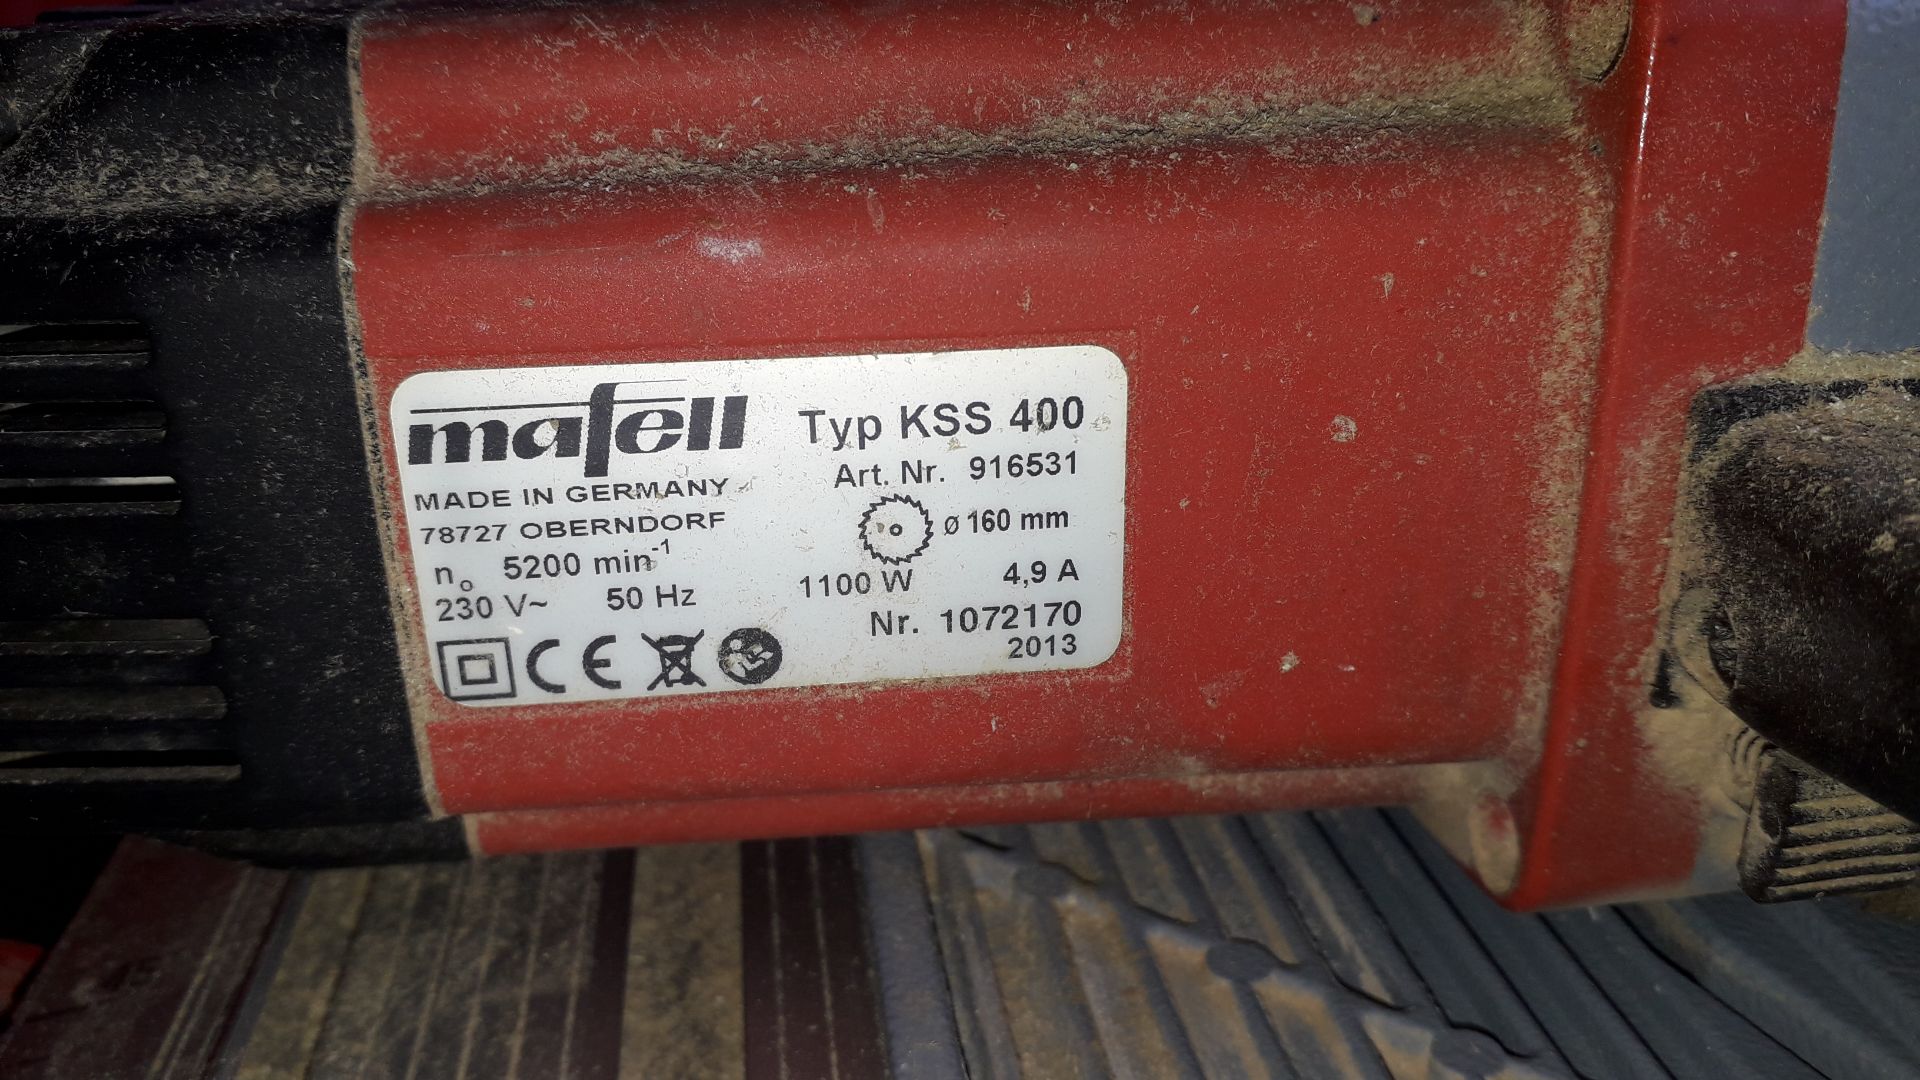 Mafell KSS400 160mm Cross Cutting Saw with Guide Rail (2013), S/N 1072170, 240v - Image 4 of 4